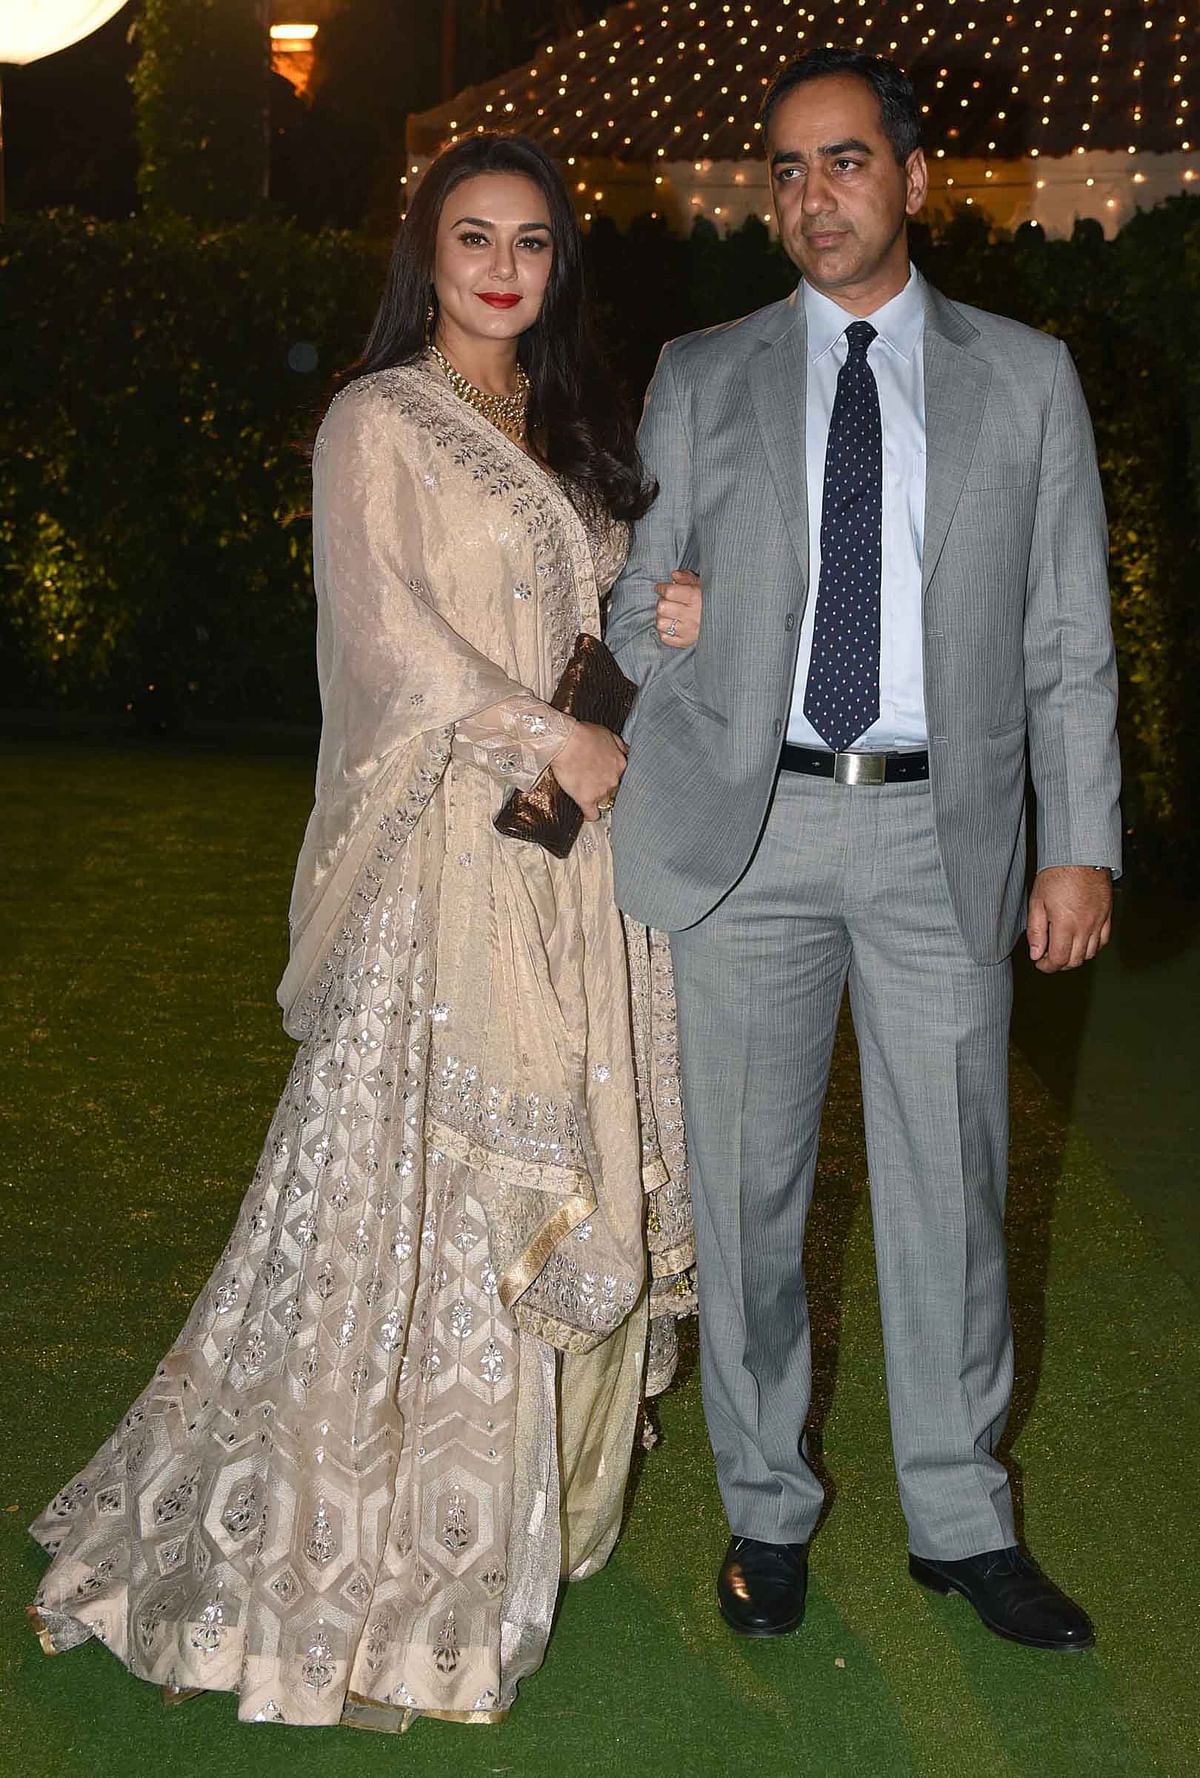 Priety Zinta, Shahid Kapoor and Sonakshi Sinha were also present at the wedding reception.